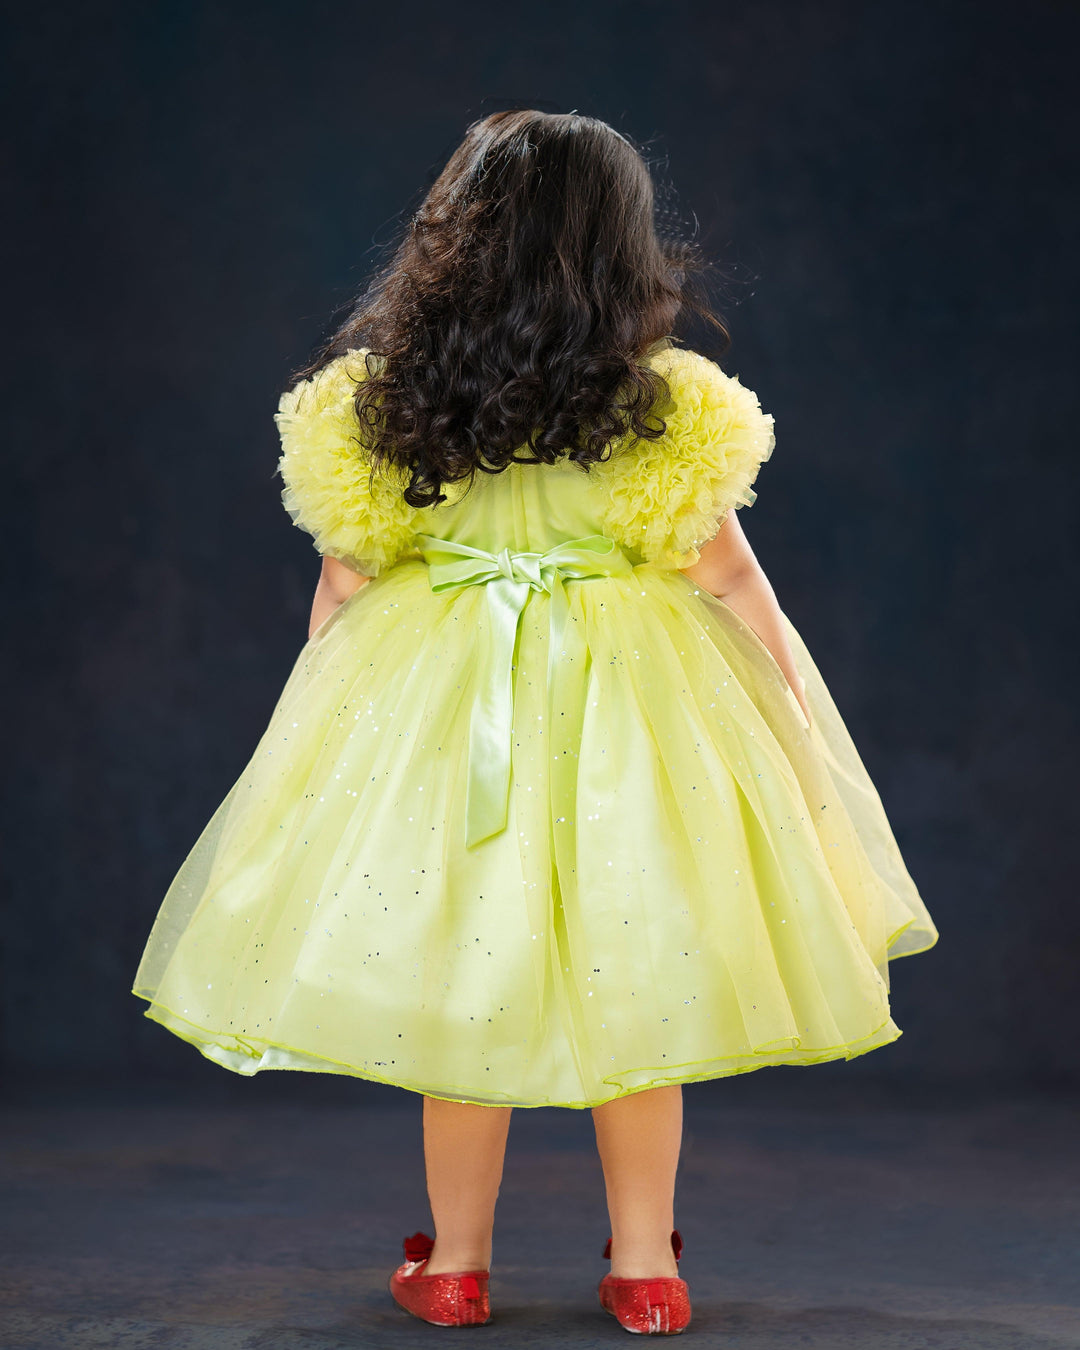 Pista green Glitter Baby-Girls Party Perfect Birthday Frock

Material : Pista green shade glitter party perfect frock is made with soft nylon net fabric. The yoke portion of the frock is designed in transparent neck with ple